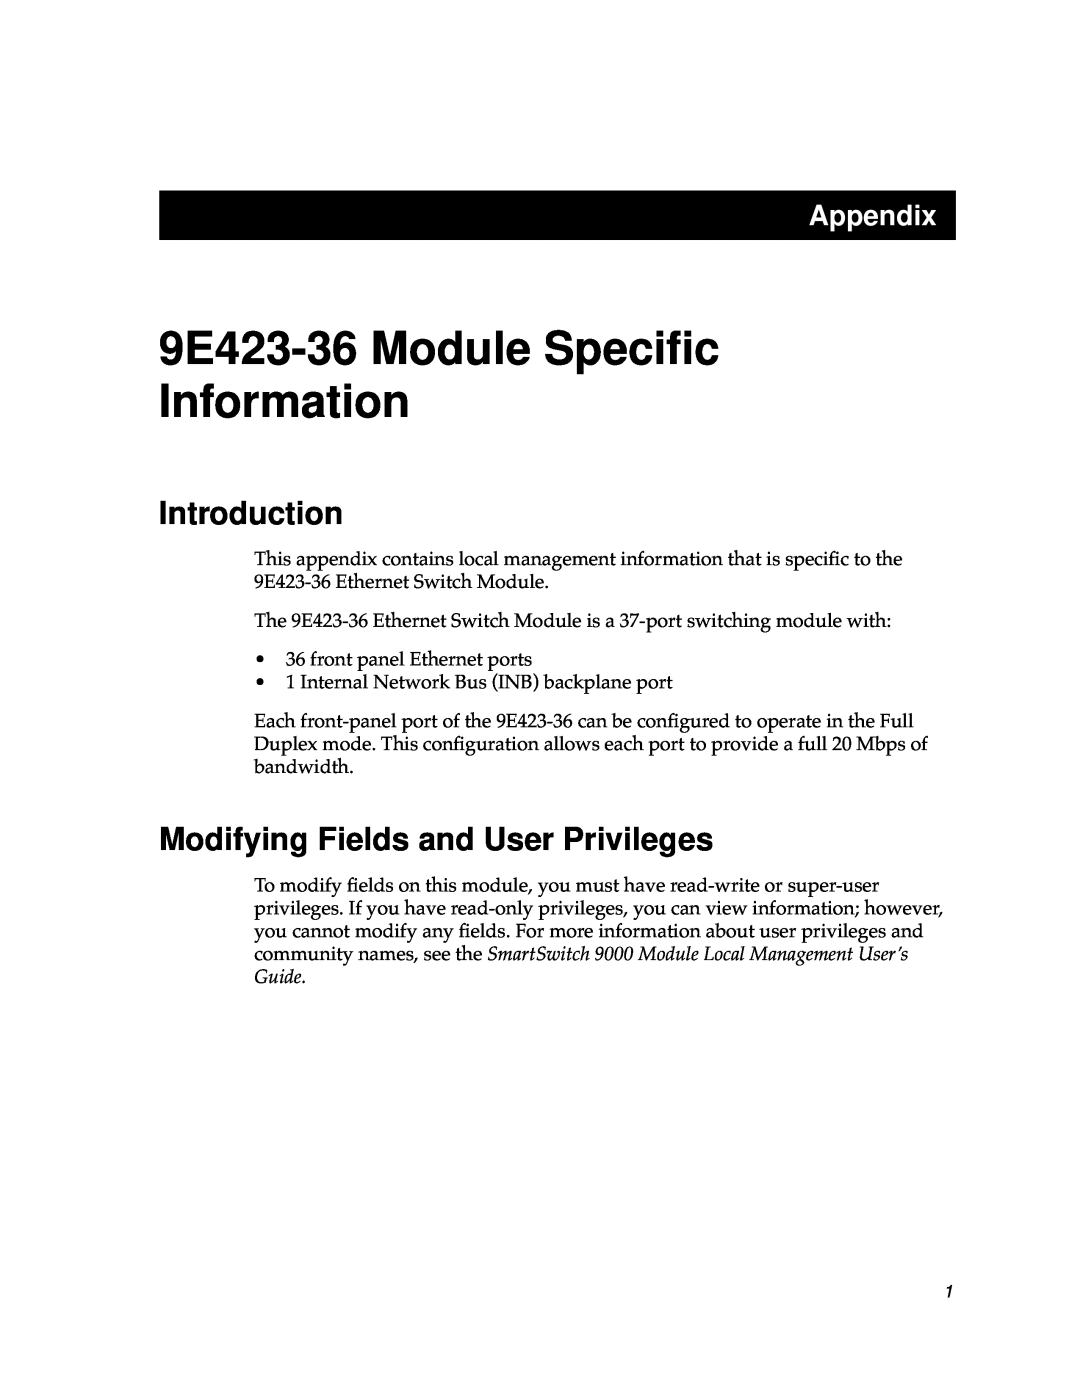 Cabletron Systems Introduction, Modifying Fields and User Privileges, 9E423-36 Module Speciﬁc Information, Appendix 